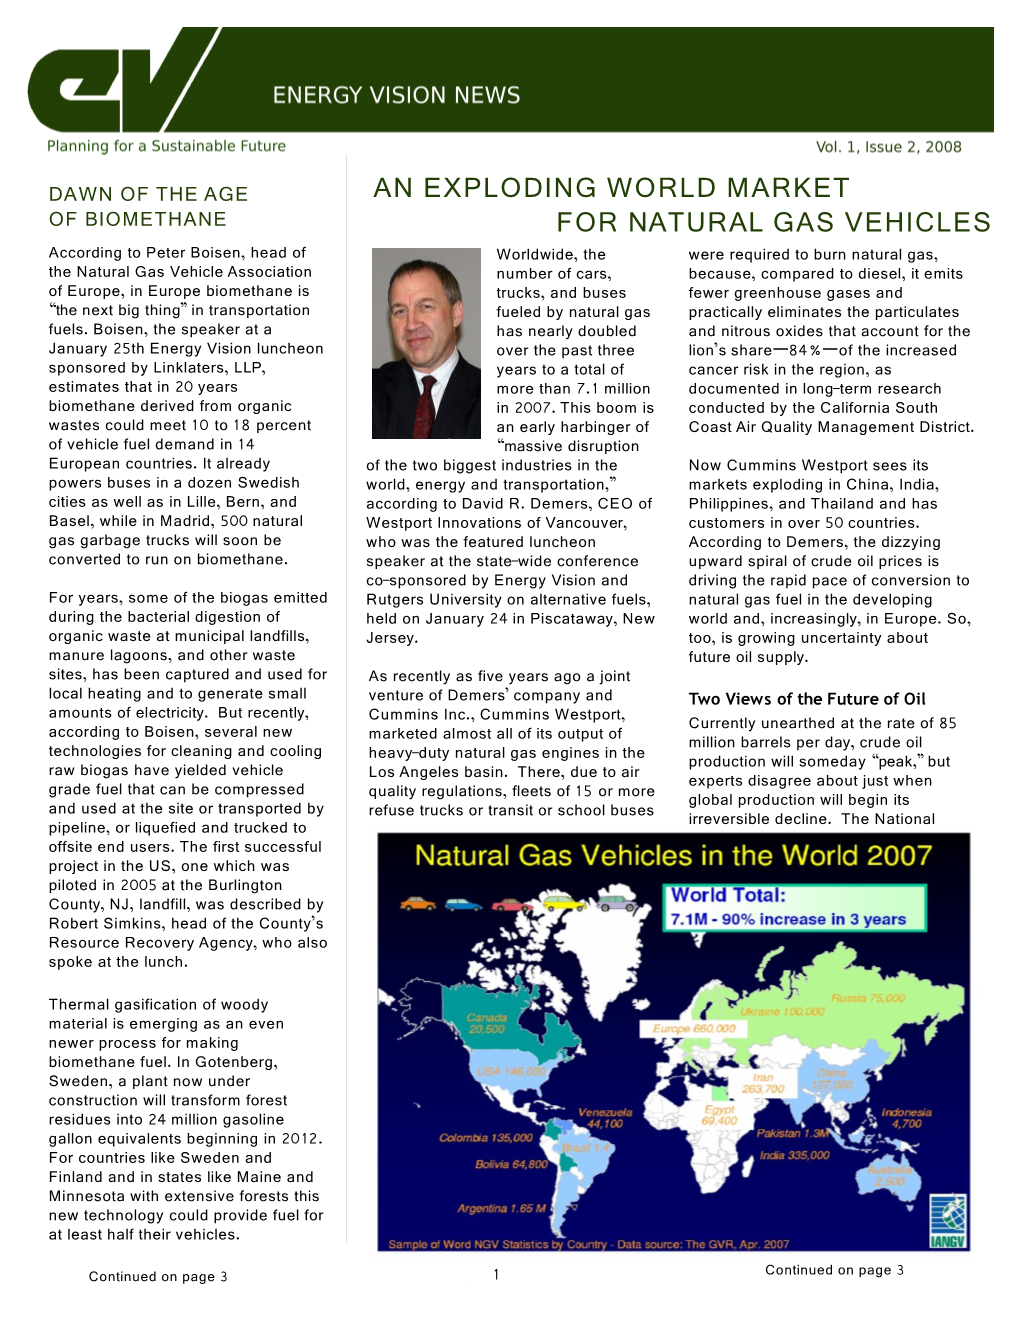 An Exploding World Market for Natural Gas Vehicles